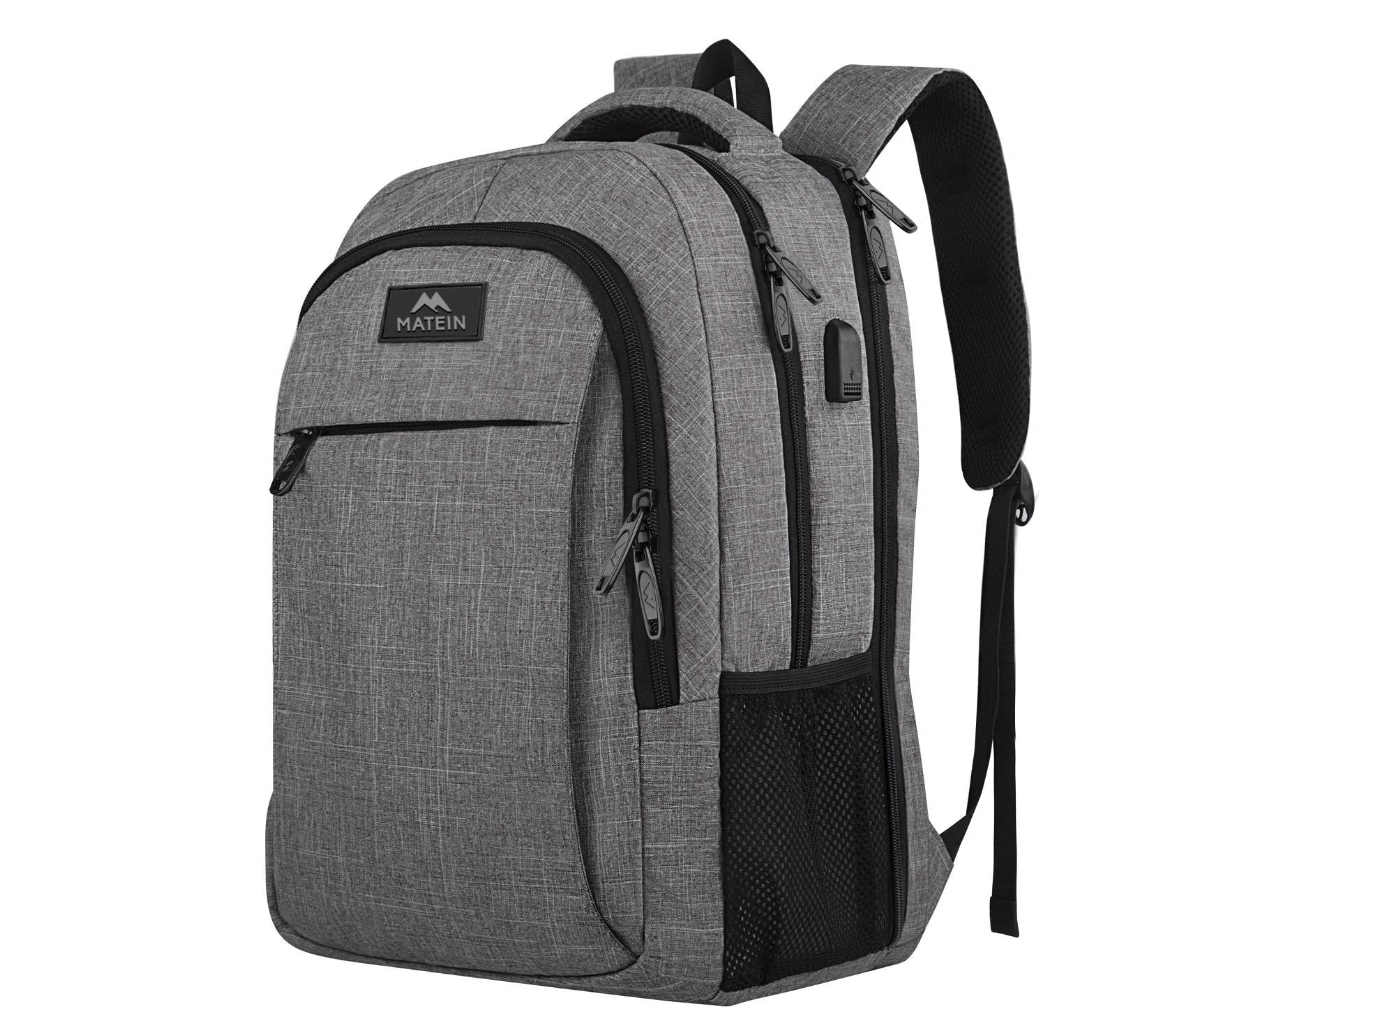 TSA Large Backpack with USB Charger Port